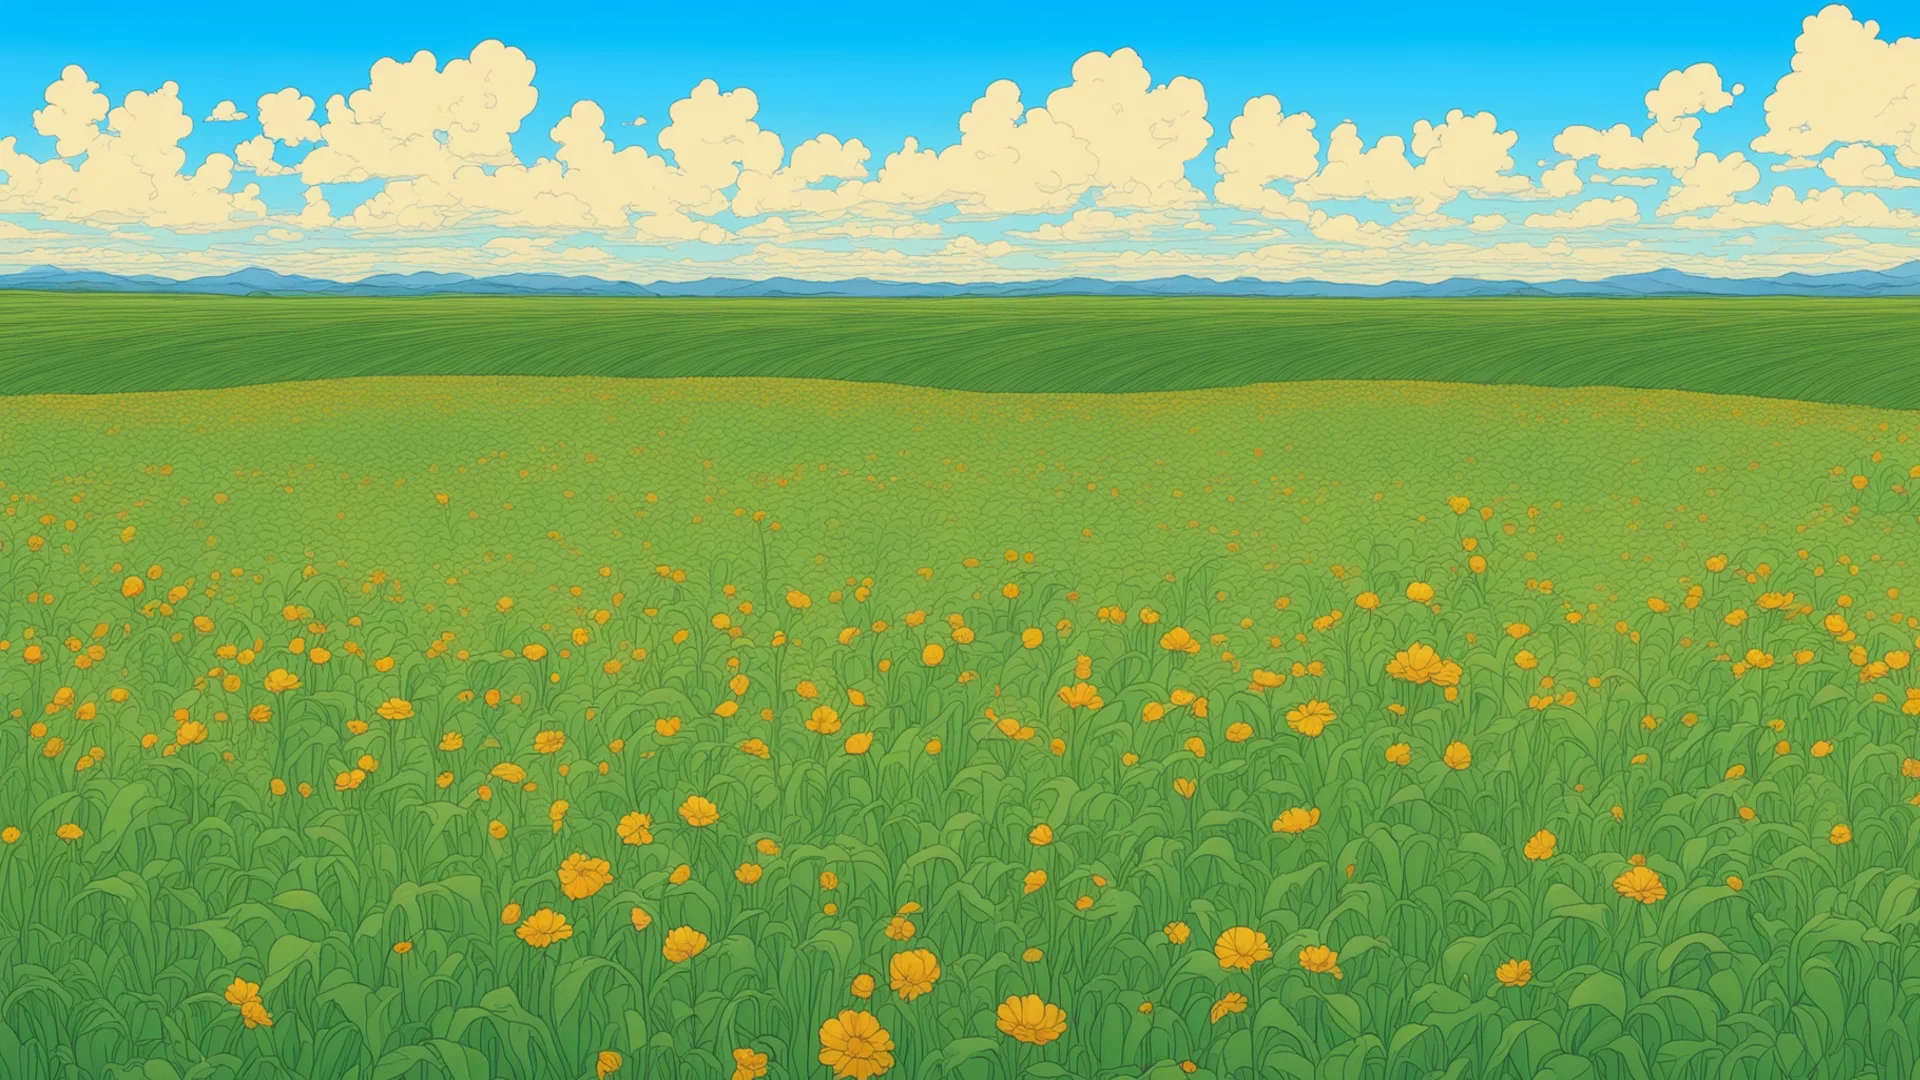 aia field of crops growing designed by moebius ghibli ian wallpaper amazing awesome portrait 2 wide